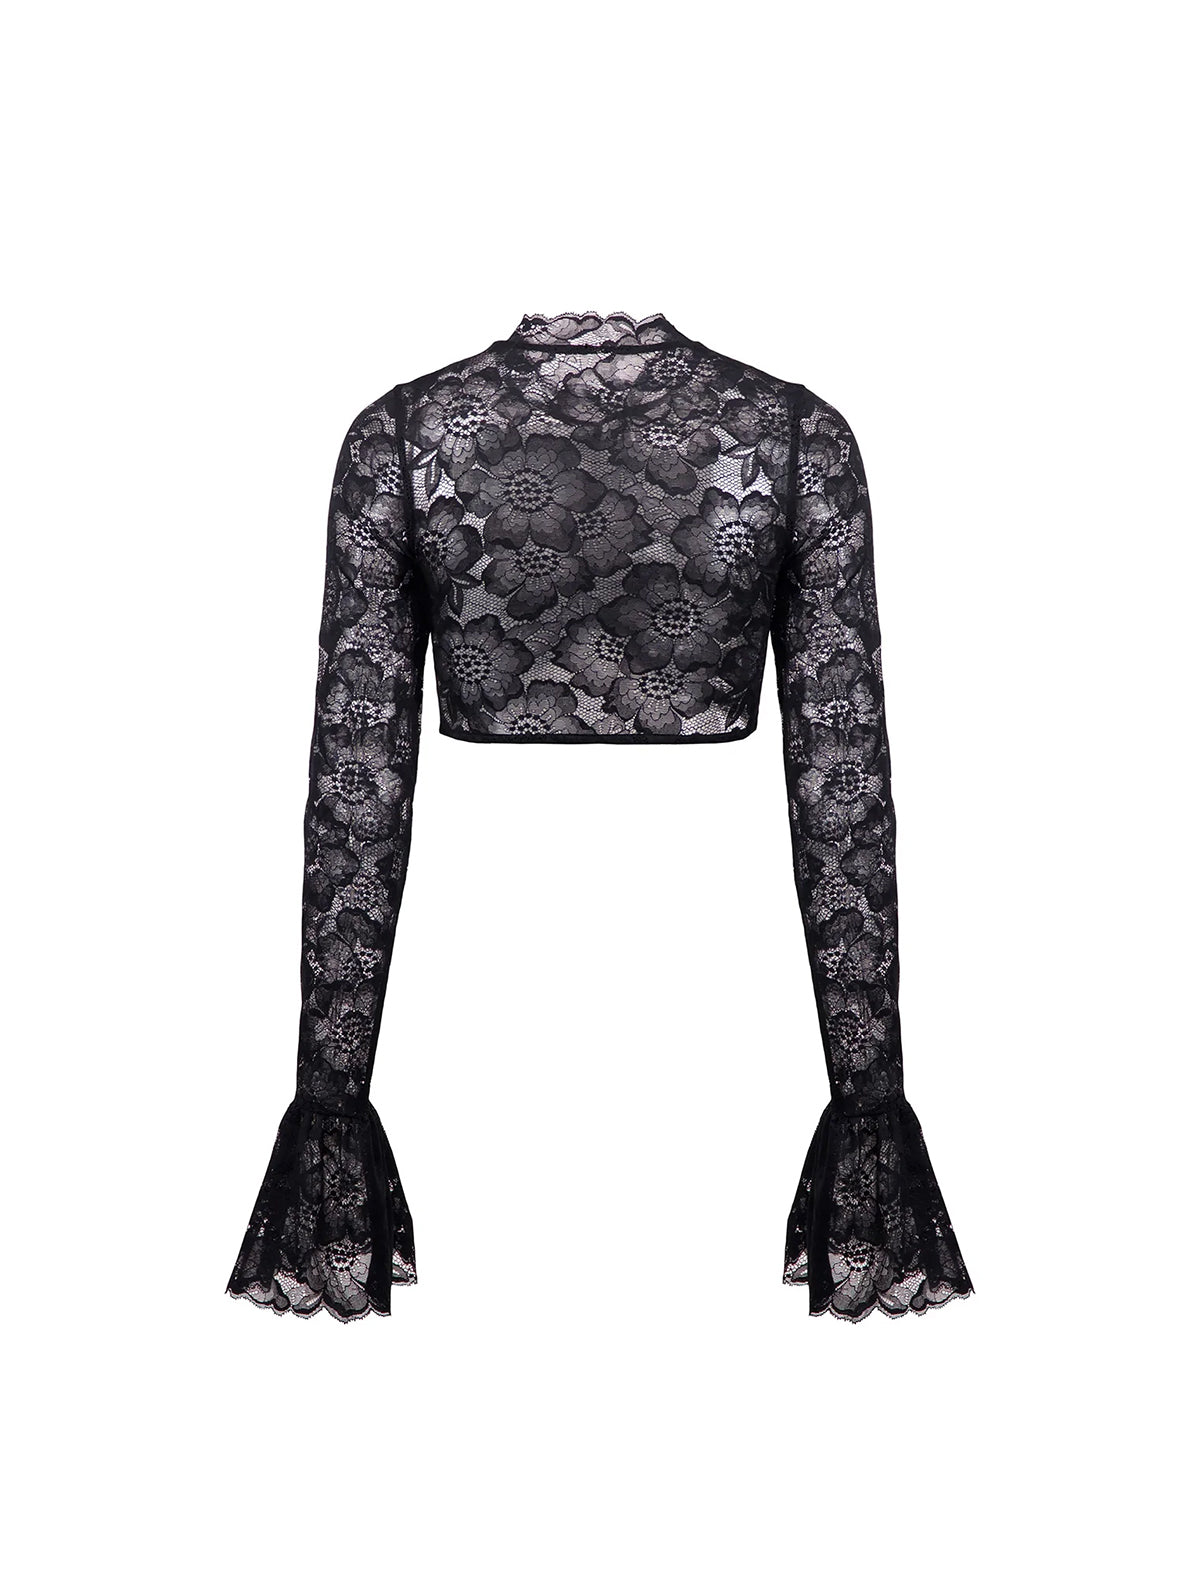 BEAUFILLE Frida Floral Lace Blouse in Black